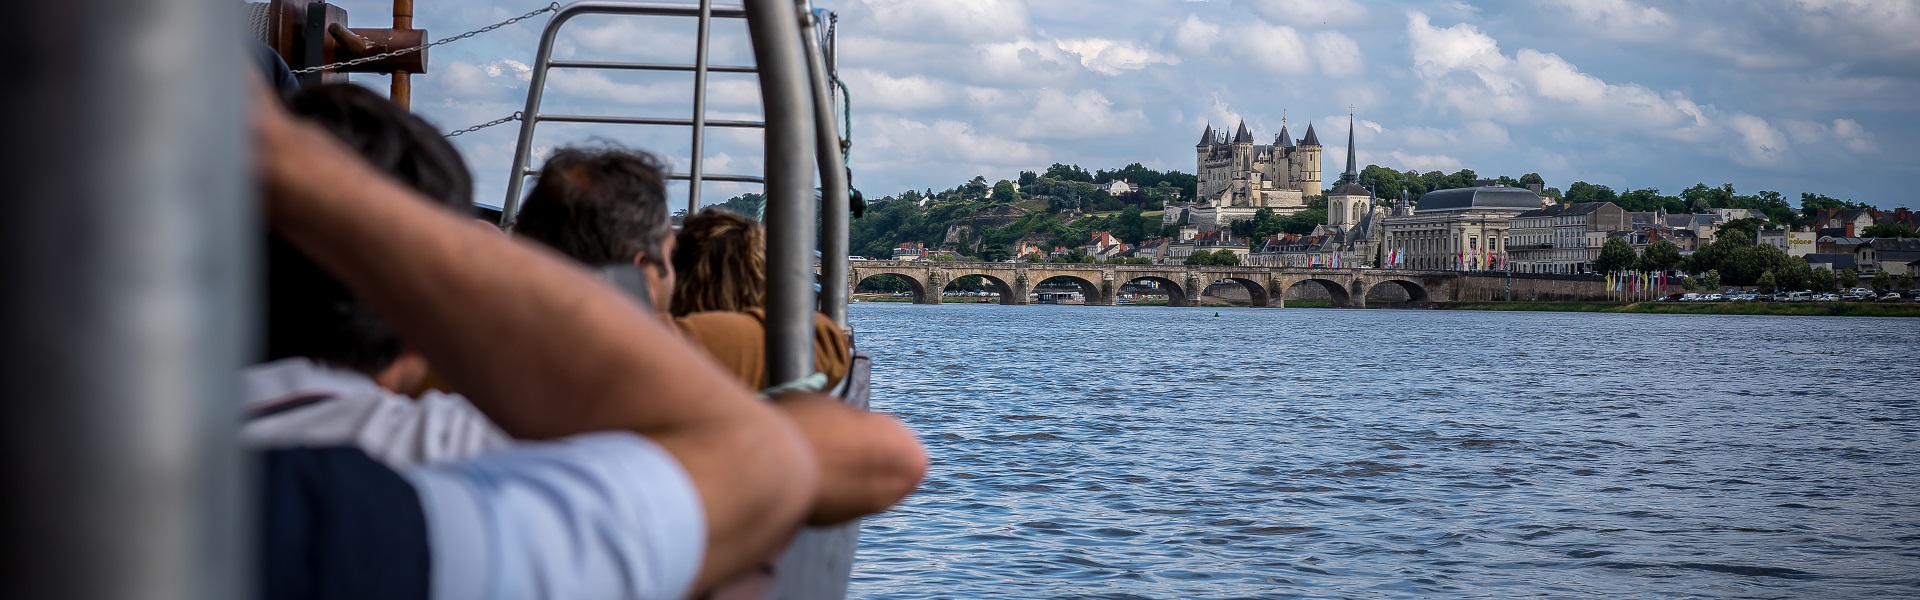 Saumur seen from the Loire